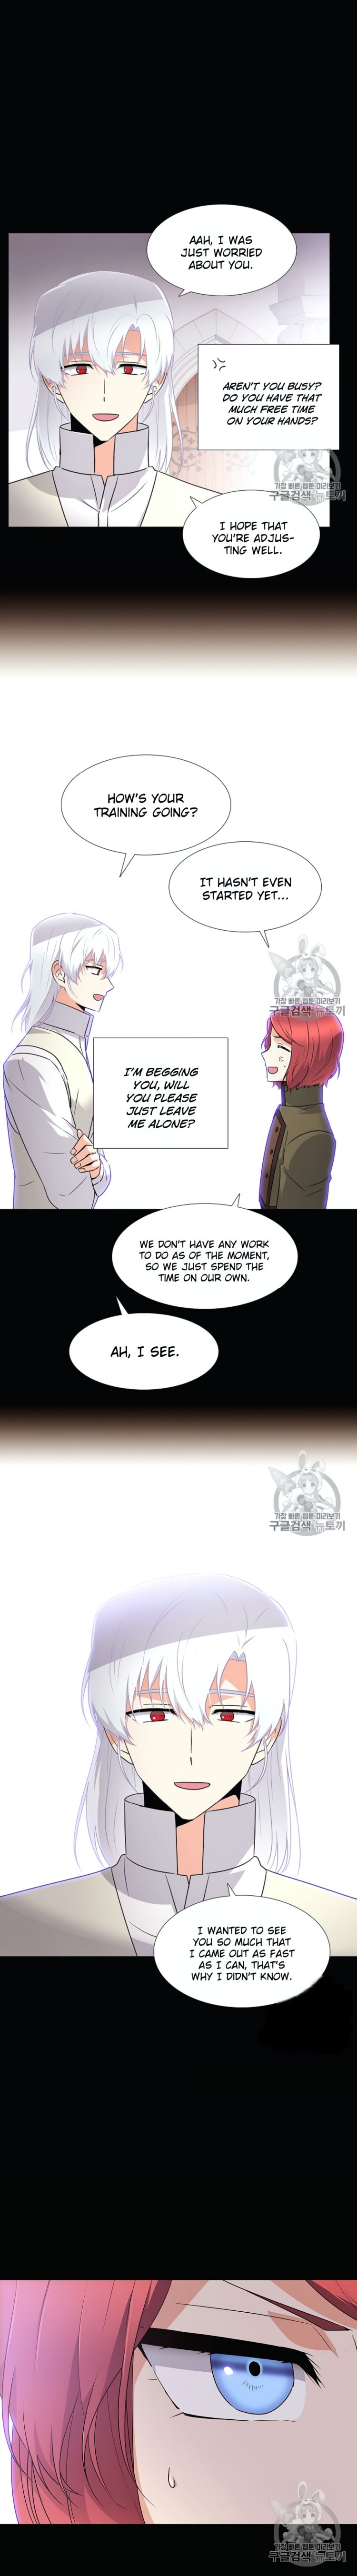 The Villain Discovered My Identity - Chapter 5 Page 5